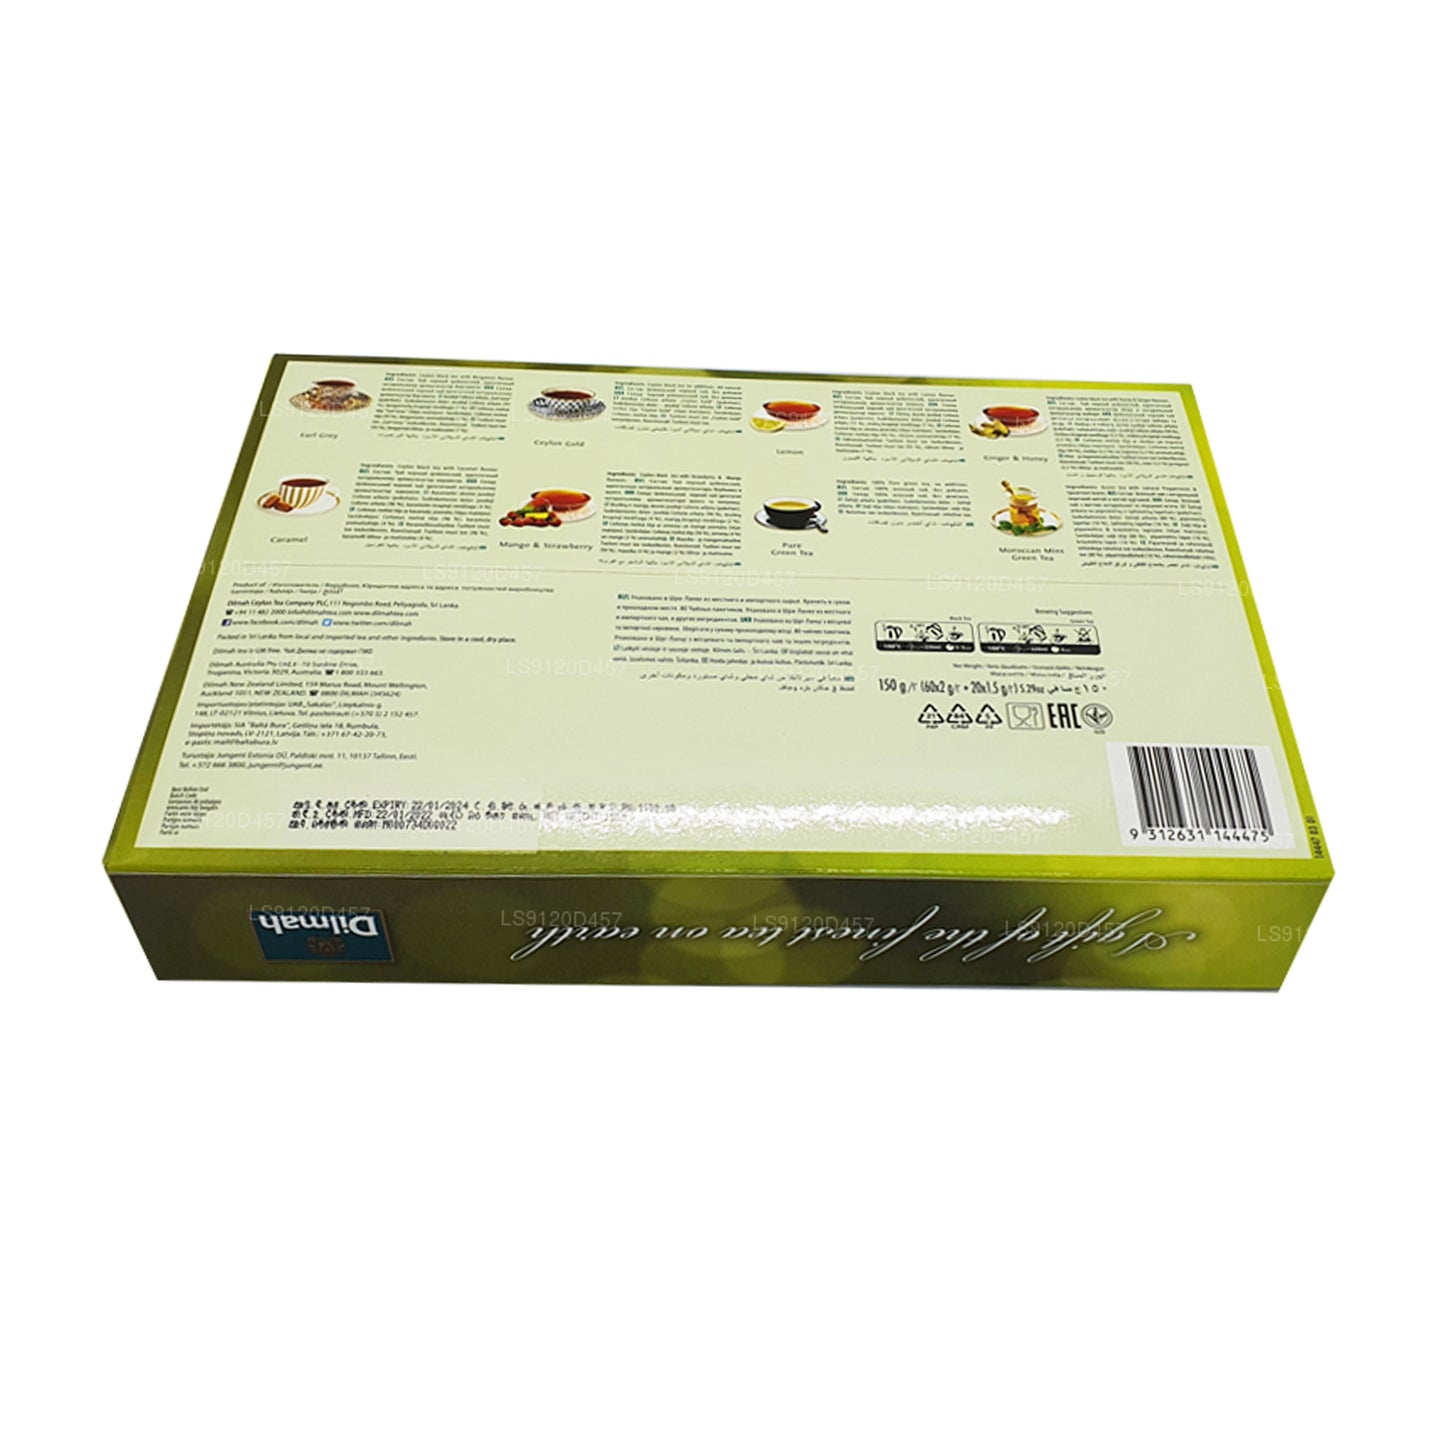 Dilmah A gift of the finest tea on earth (150g) 80 Tea Bags